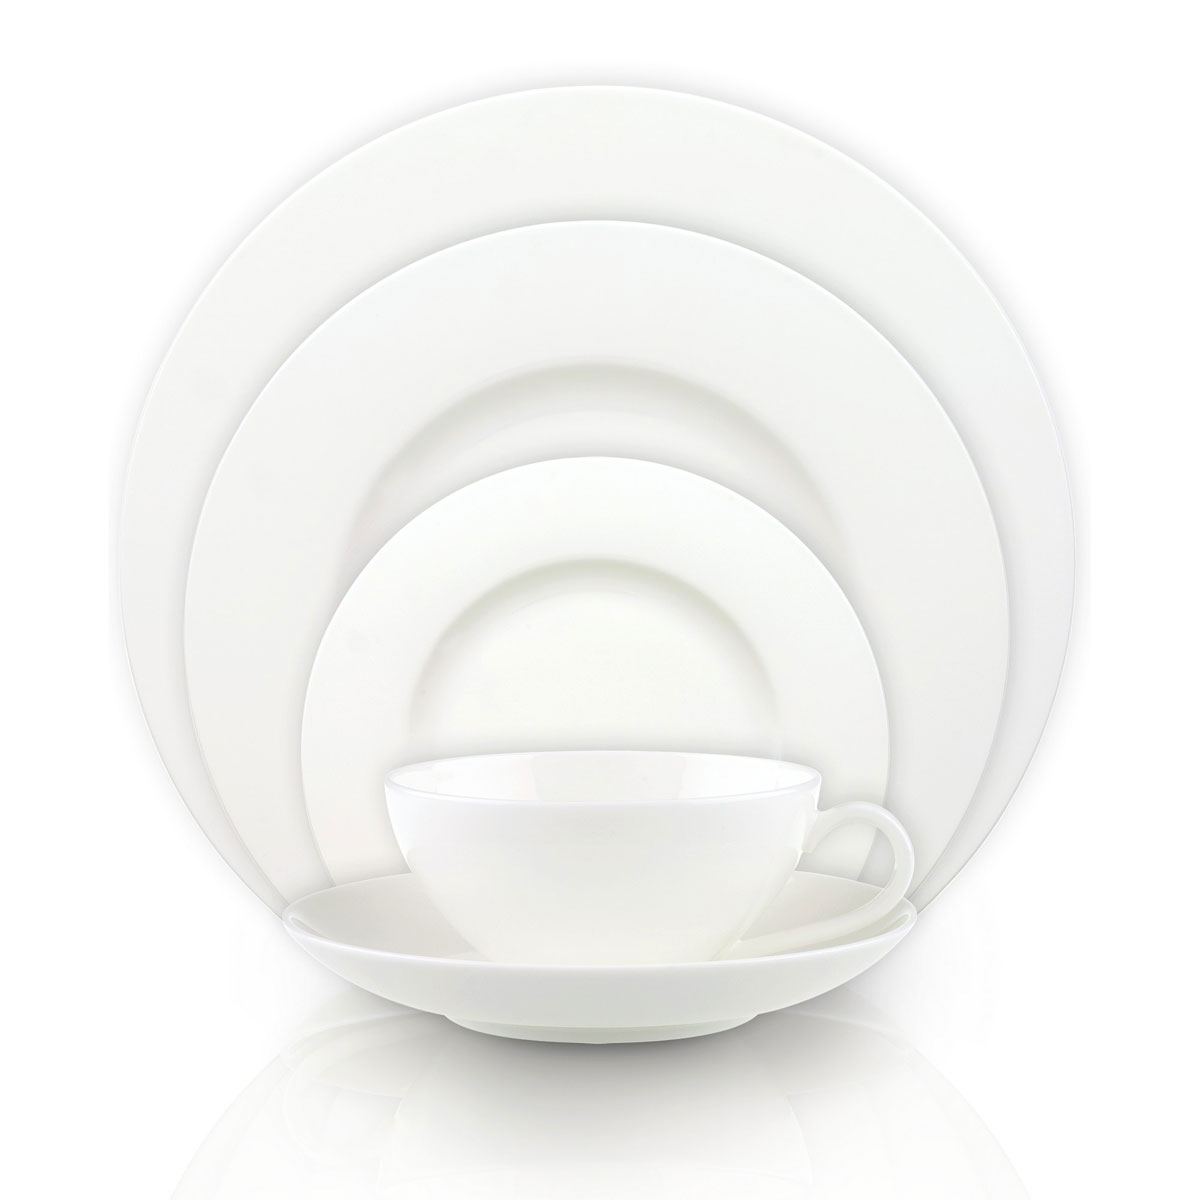 Villeroy and Boch Anmut 5 Piece Place Setting D, S, B and B, Cup, Saucer